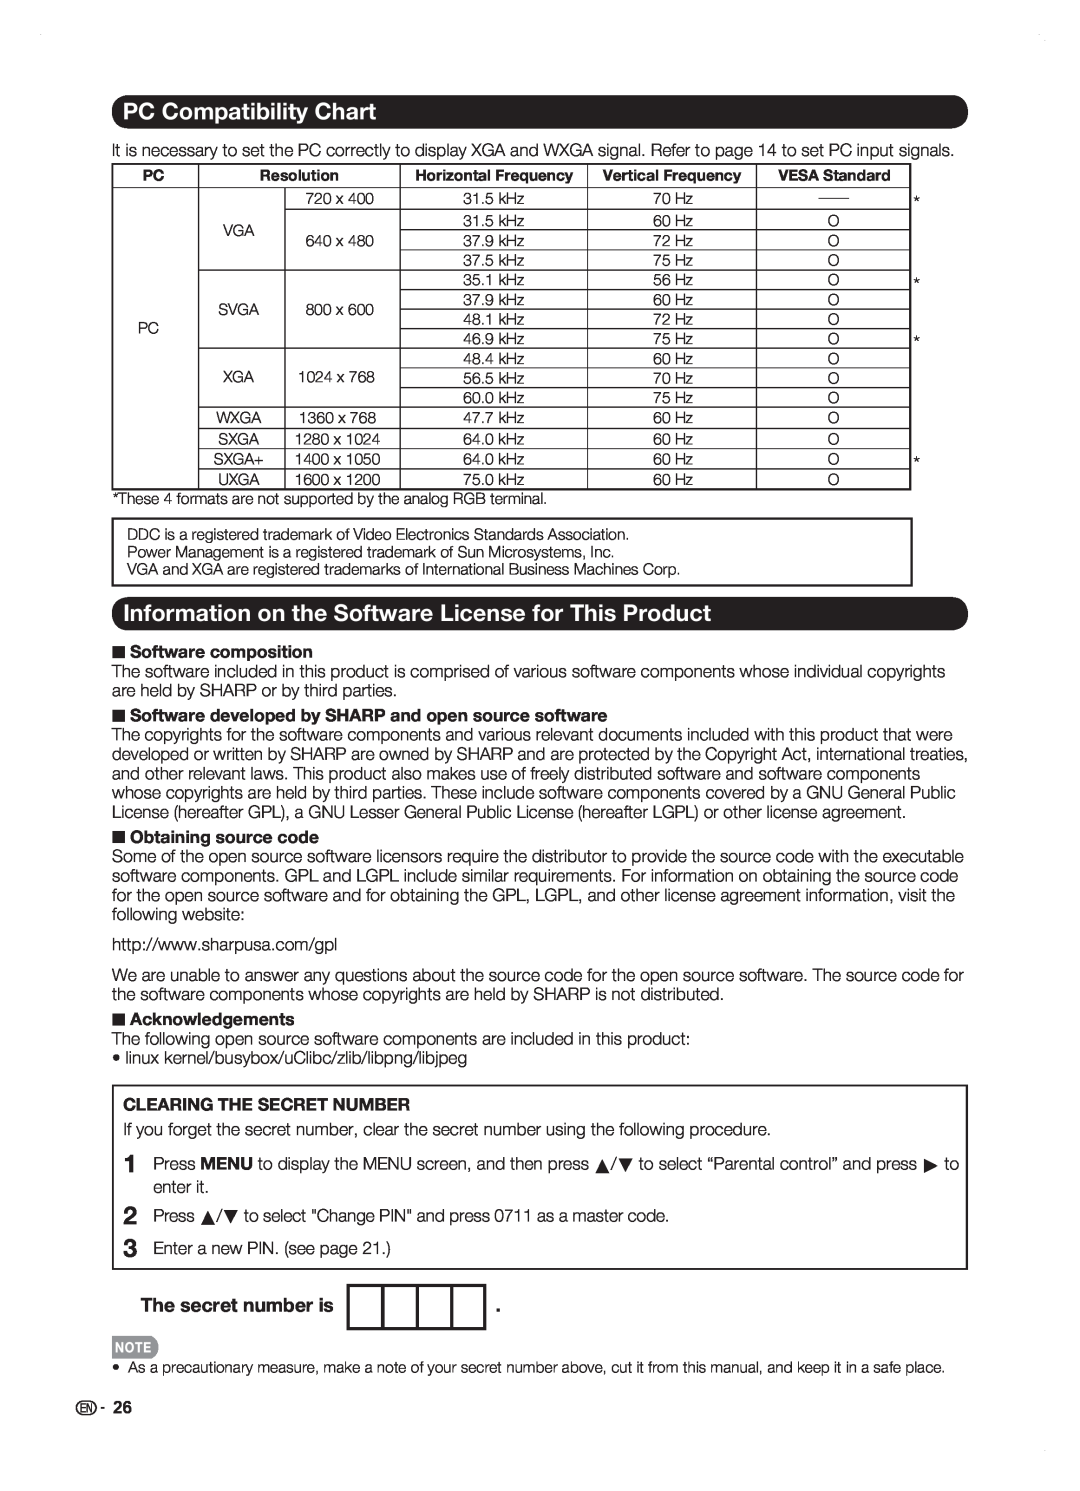 Sharp LC42SB45U PC Compatibility Chart, Information on the Software License for This Product, The secret number is 